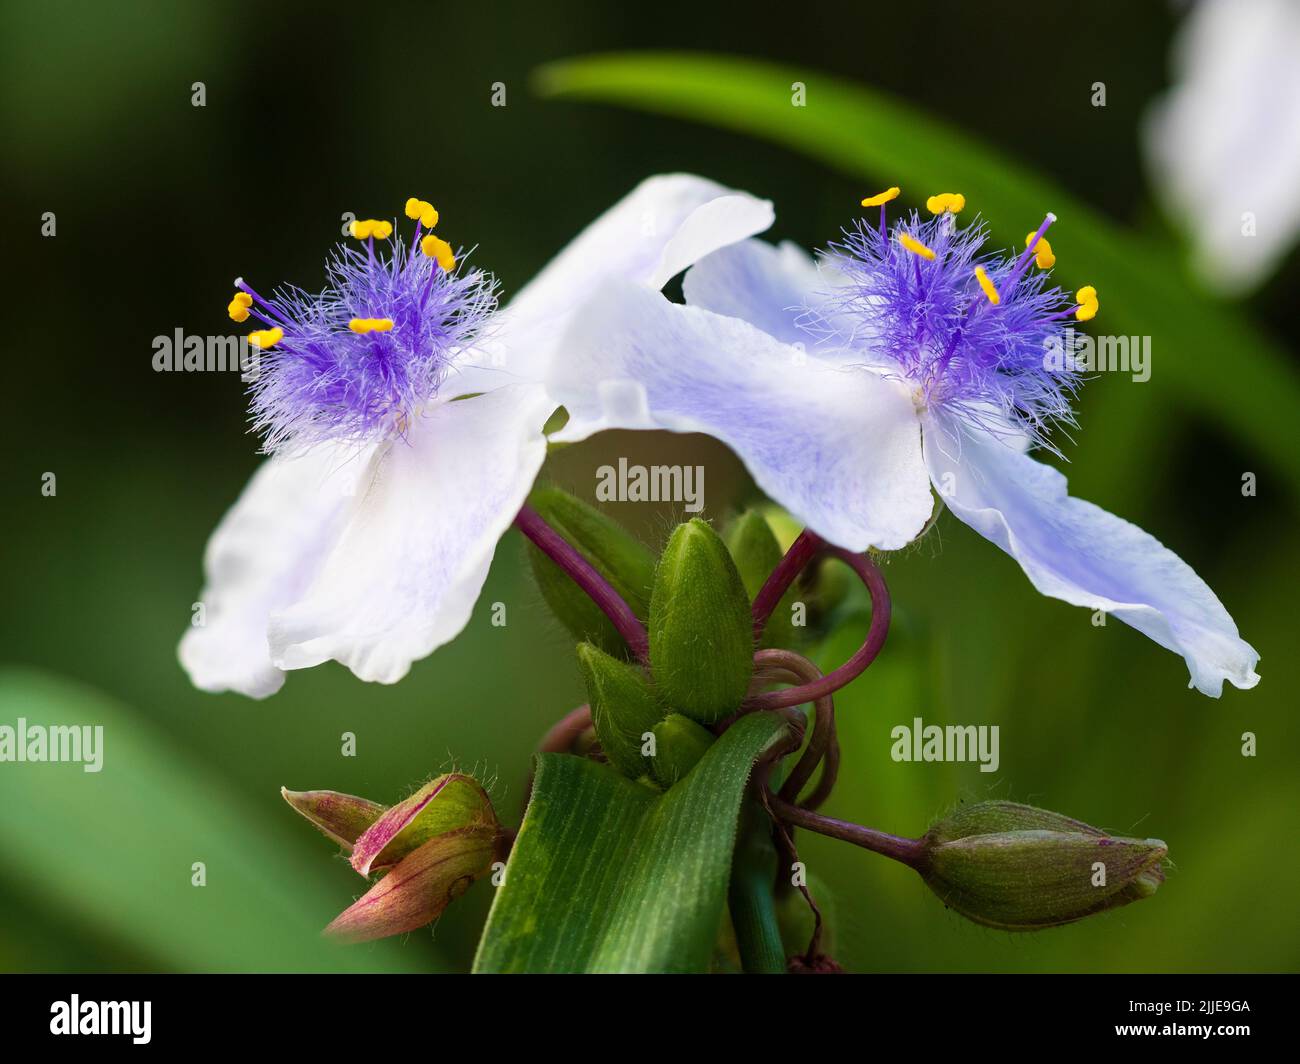 Fethery centered blue and white flowers of the summer blooming hardy perennial spiderwort, Tradescantia (Andersoniana Group) 'Iris Pritchard' Stock Photo